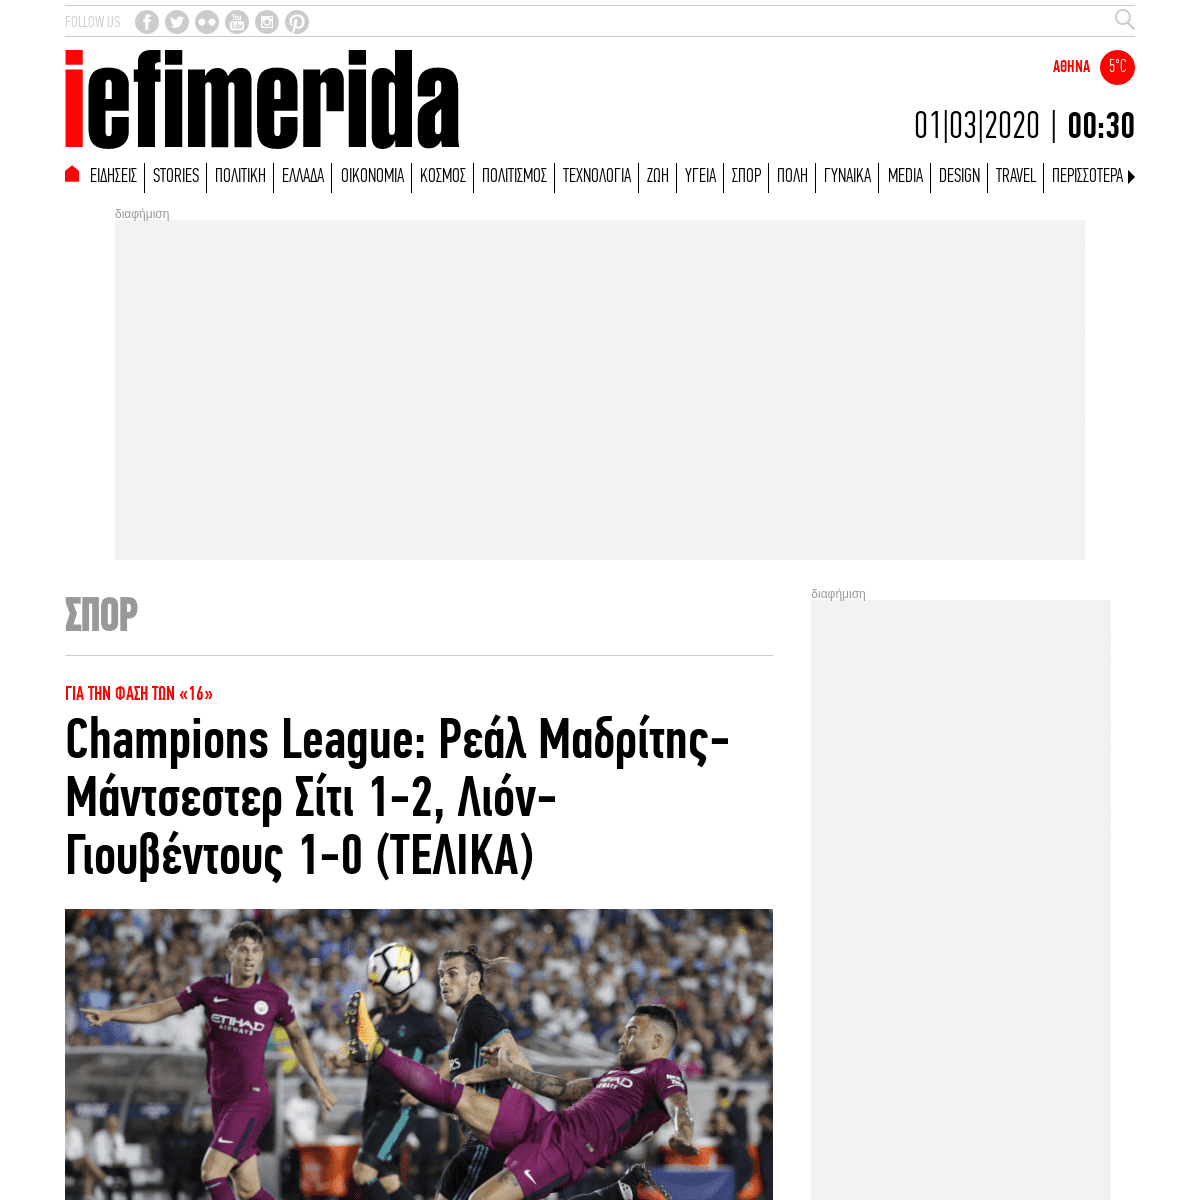 A complete backup of www.iefimerida.gr/spor/champions-league-siti-real-lion-gioybentoys